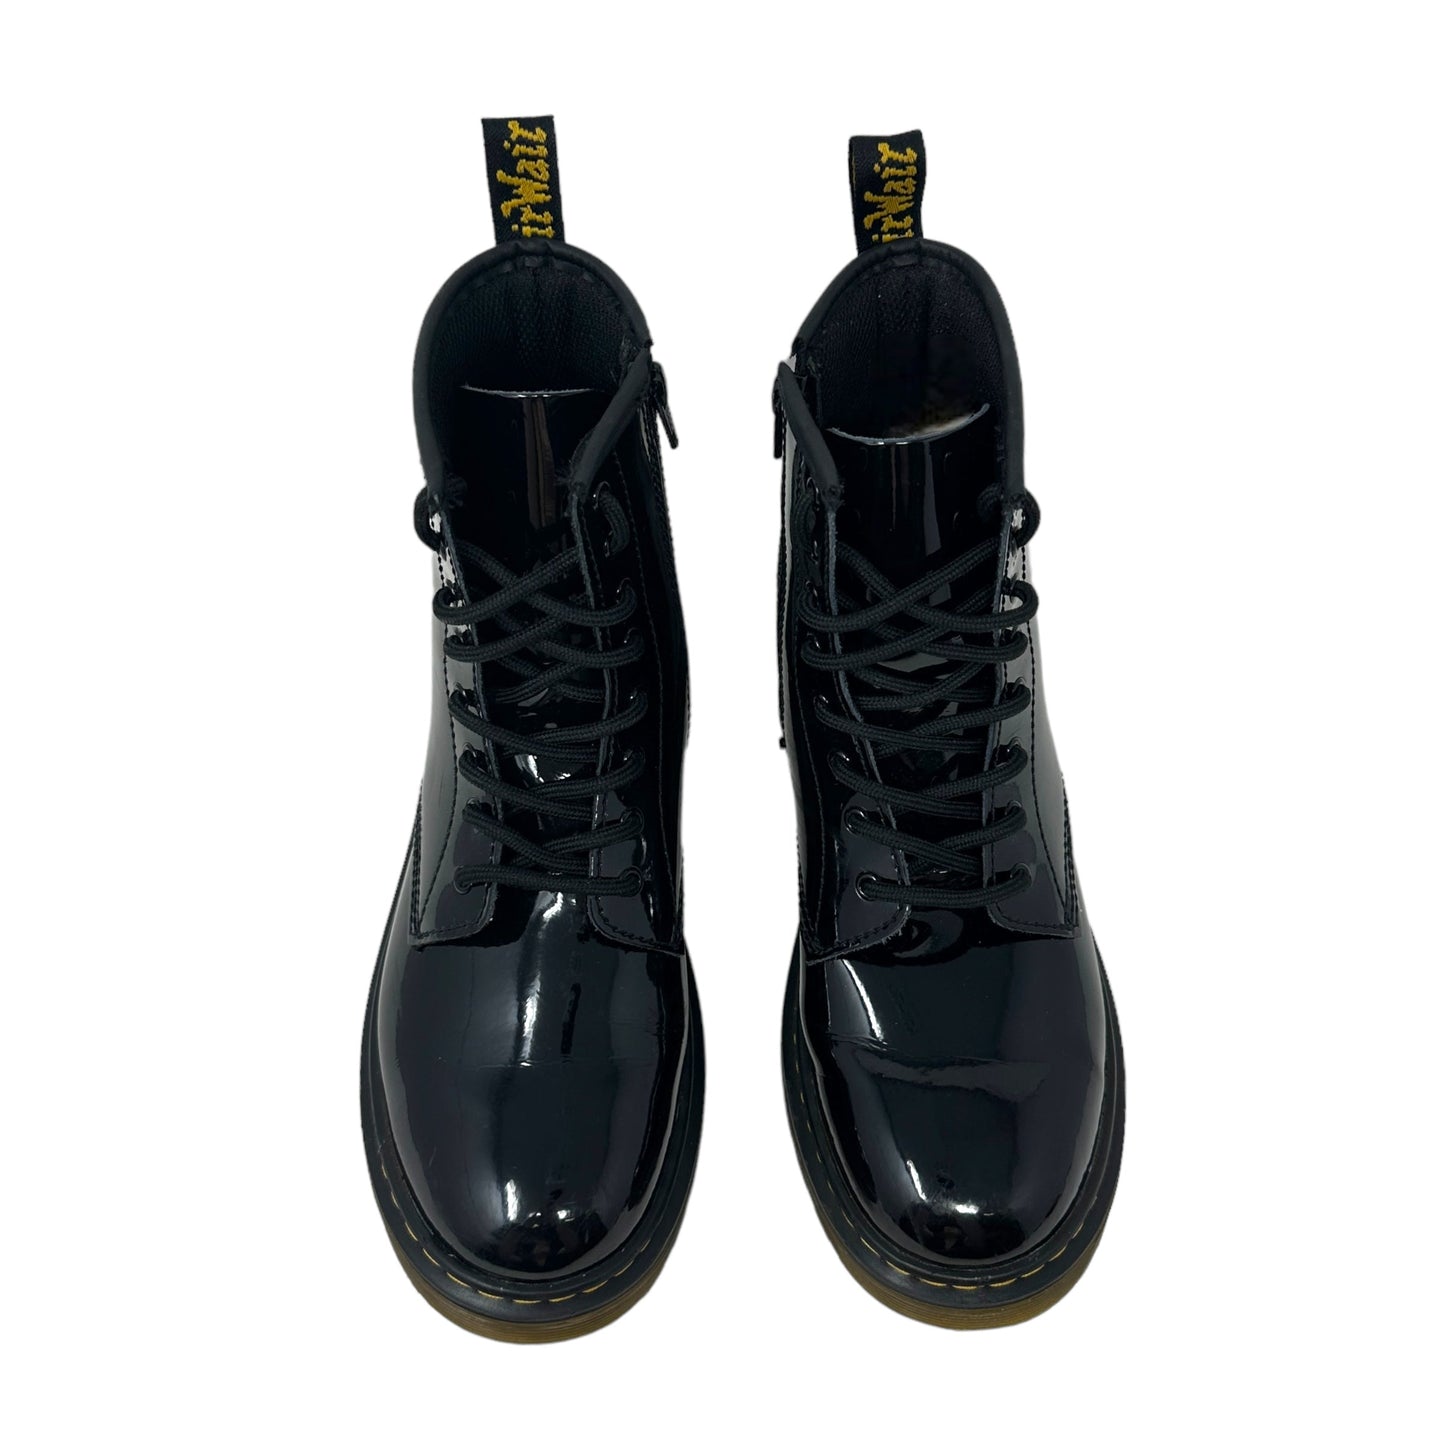 1460 Patent Leather Combat Boots By Dr Martens  Size: 6